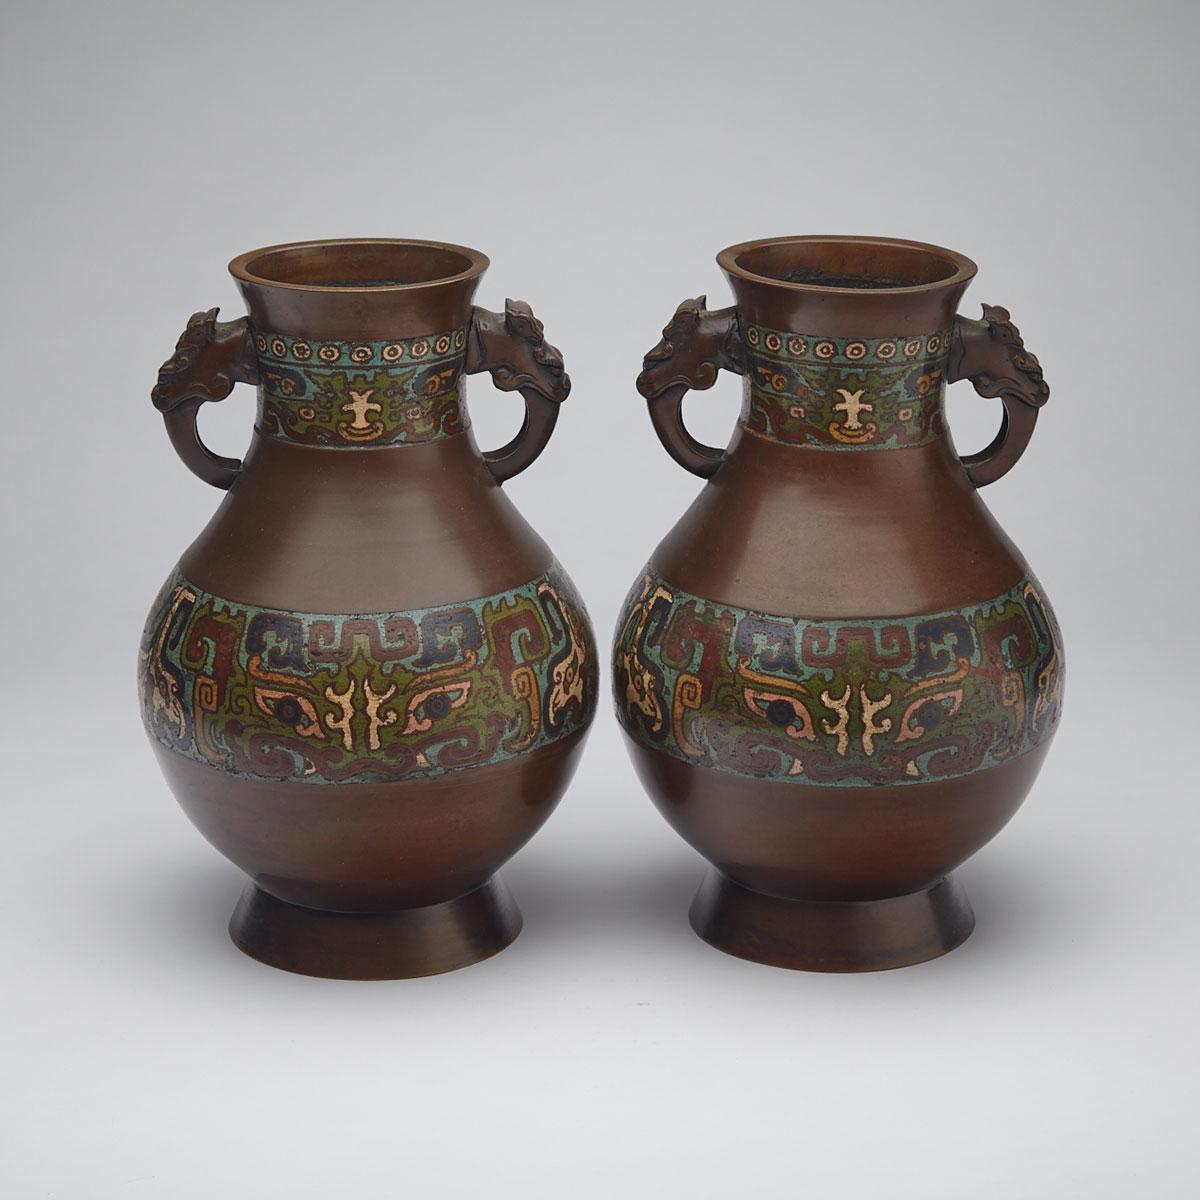 Pair of Champlevee Enamel Vases, Signed, Taisho Period, Early 20th Century